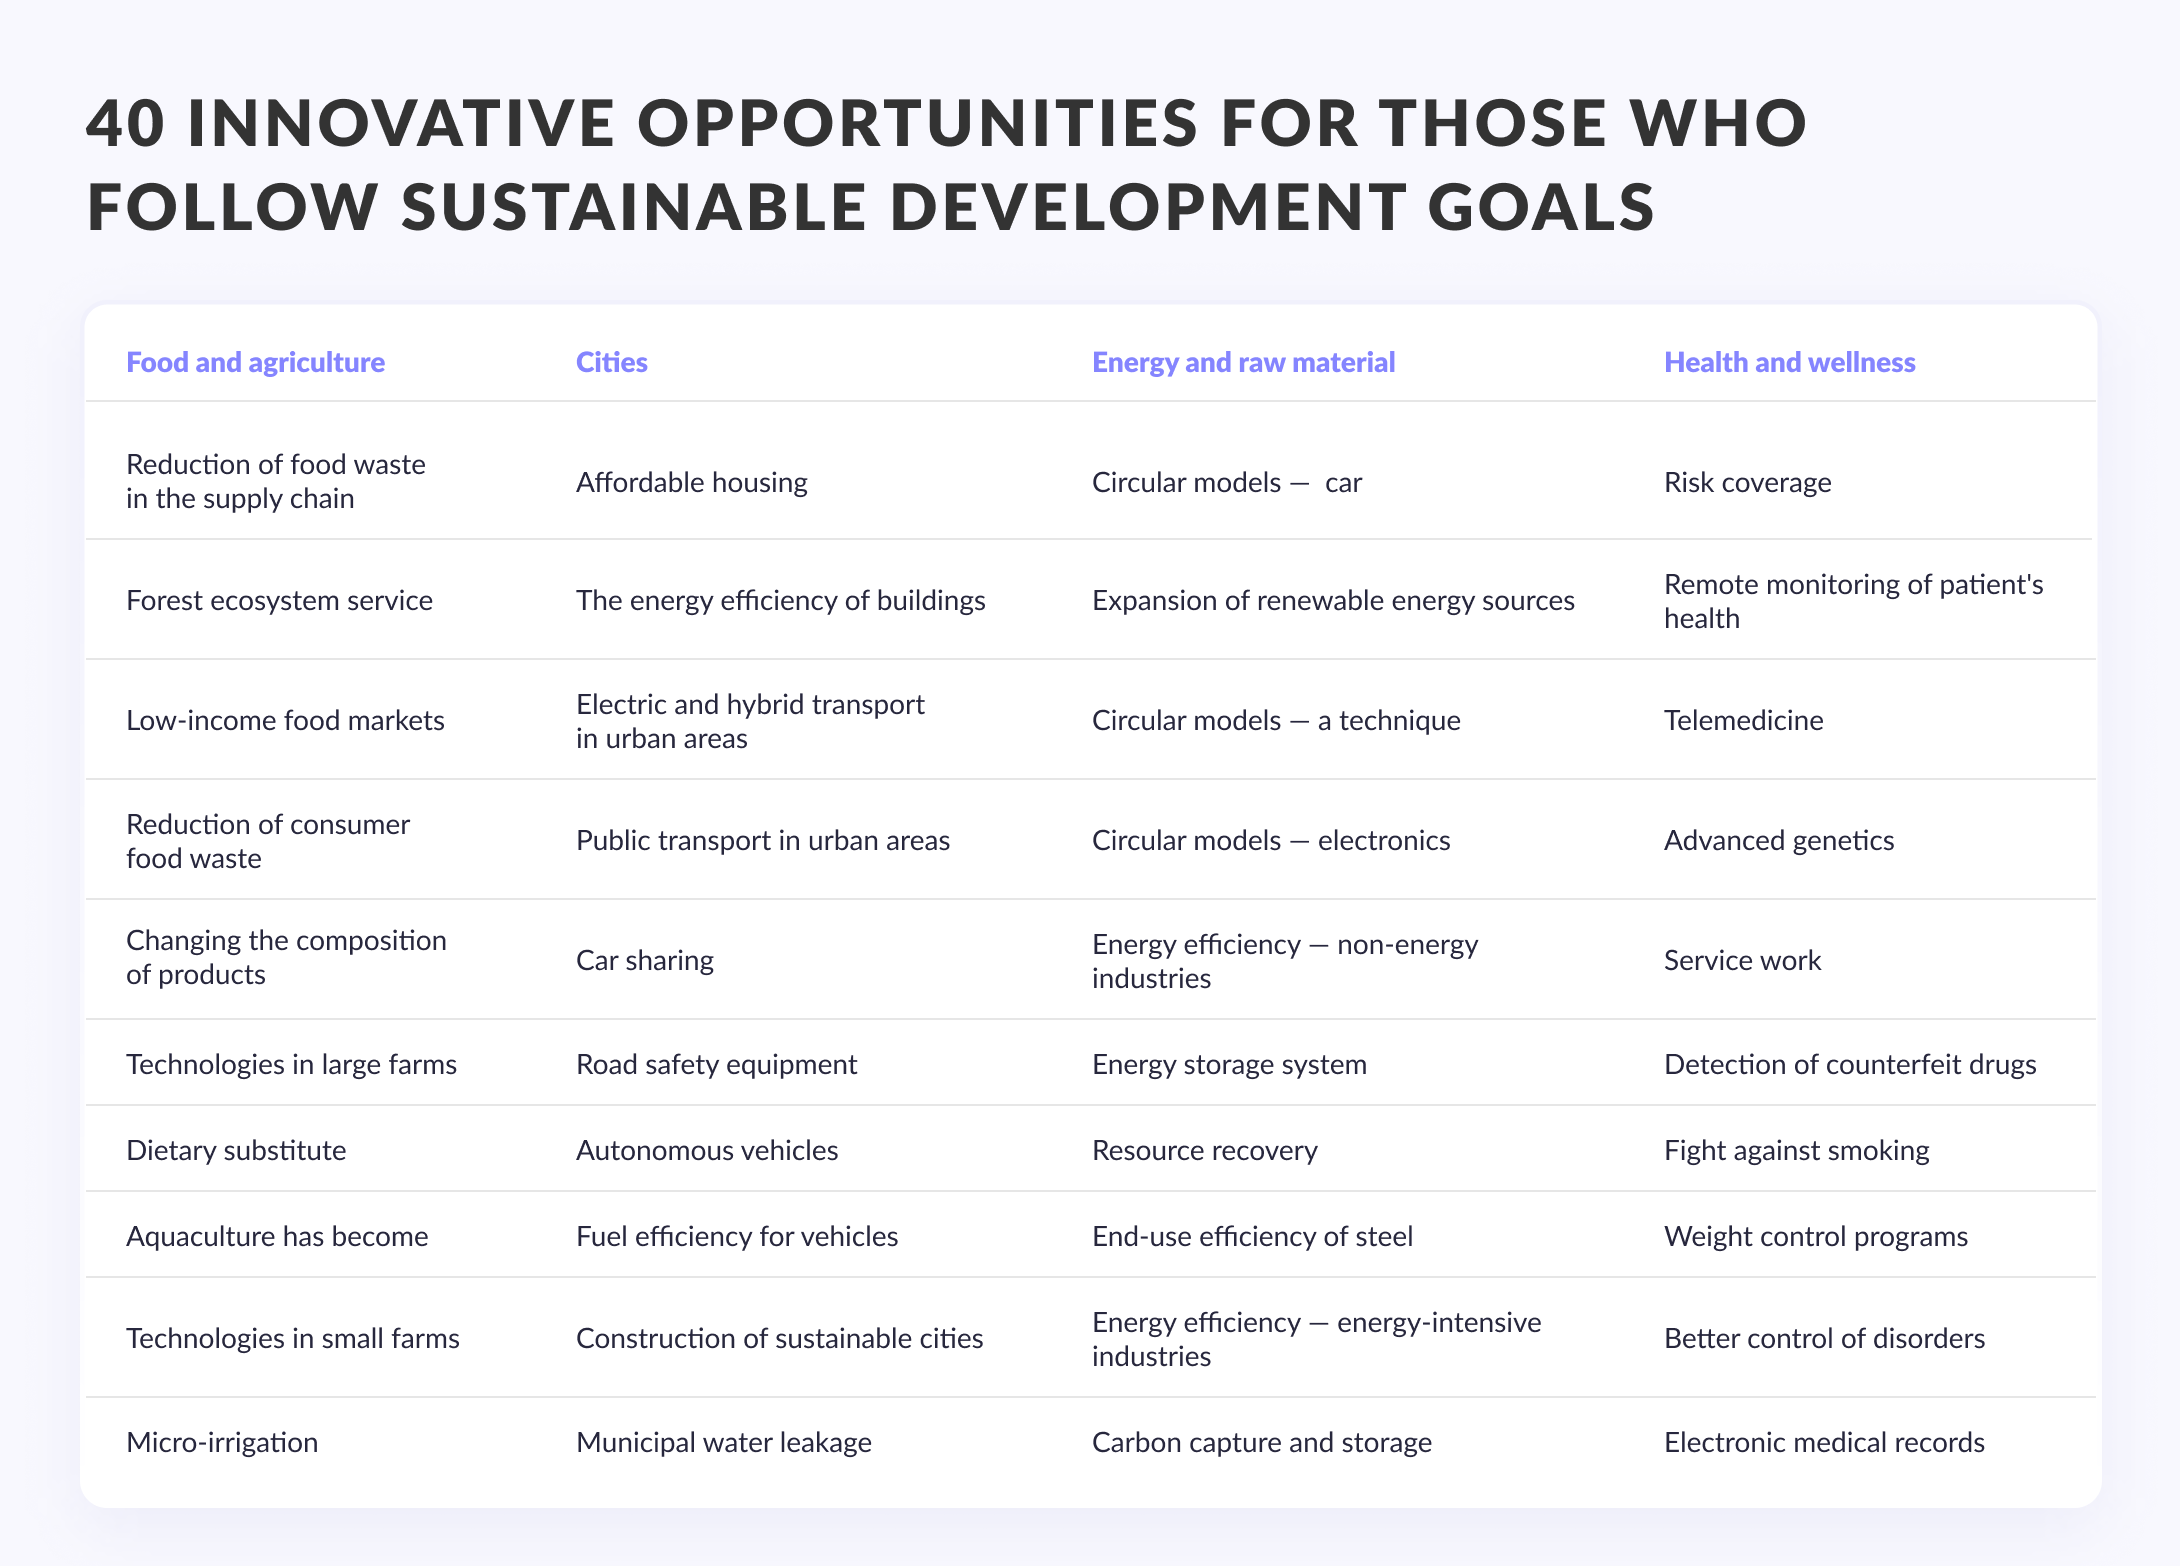 40 innovative opportunities for those who follow sustainable development goals